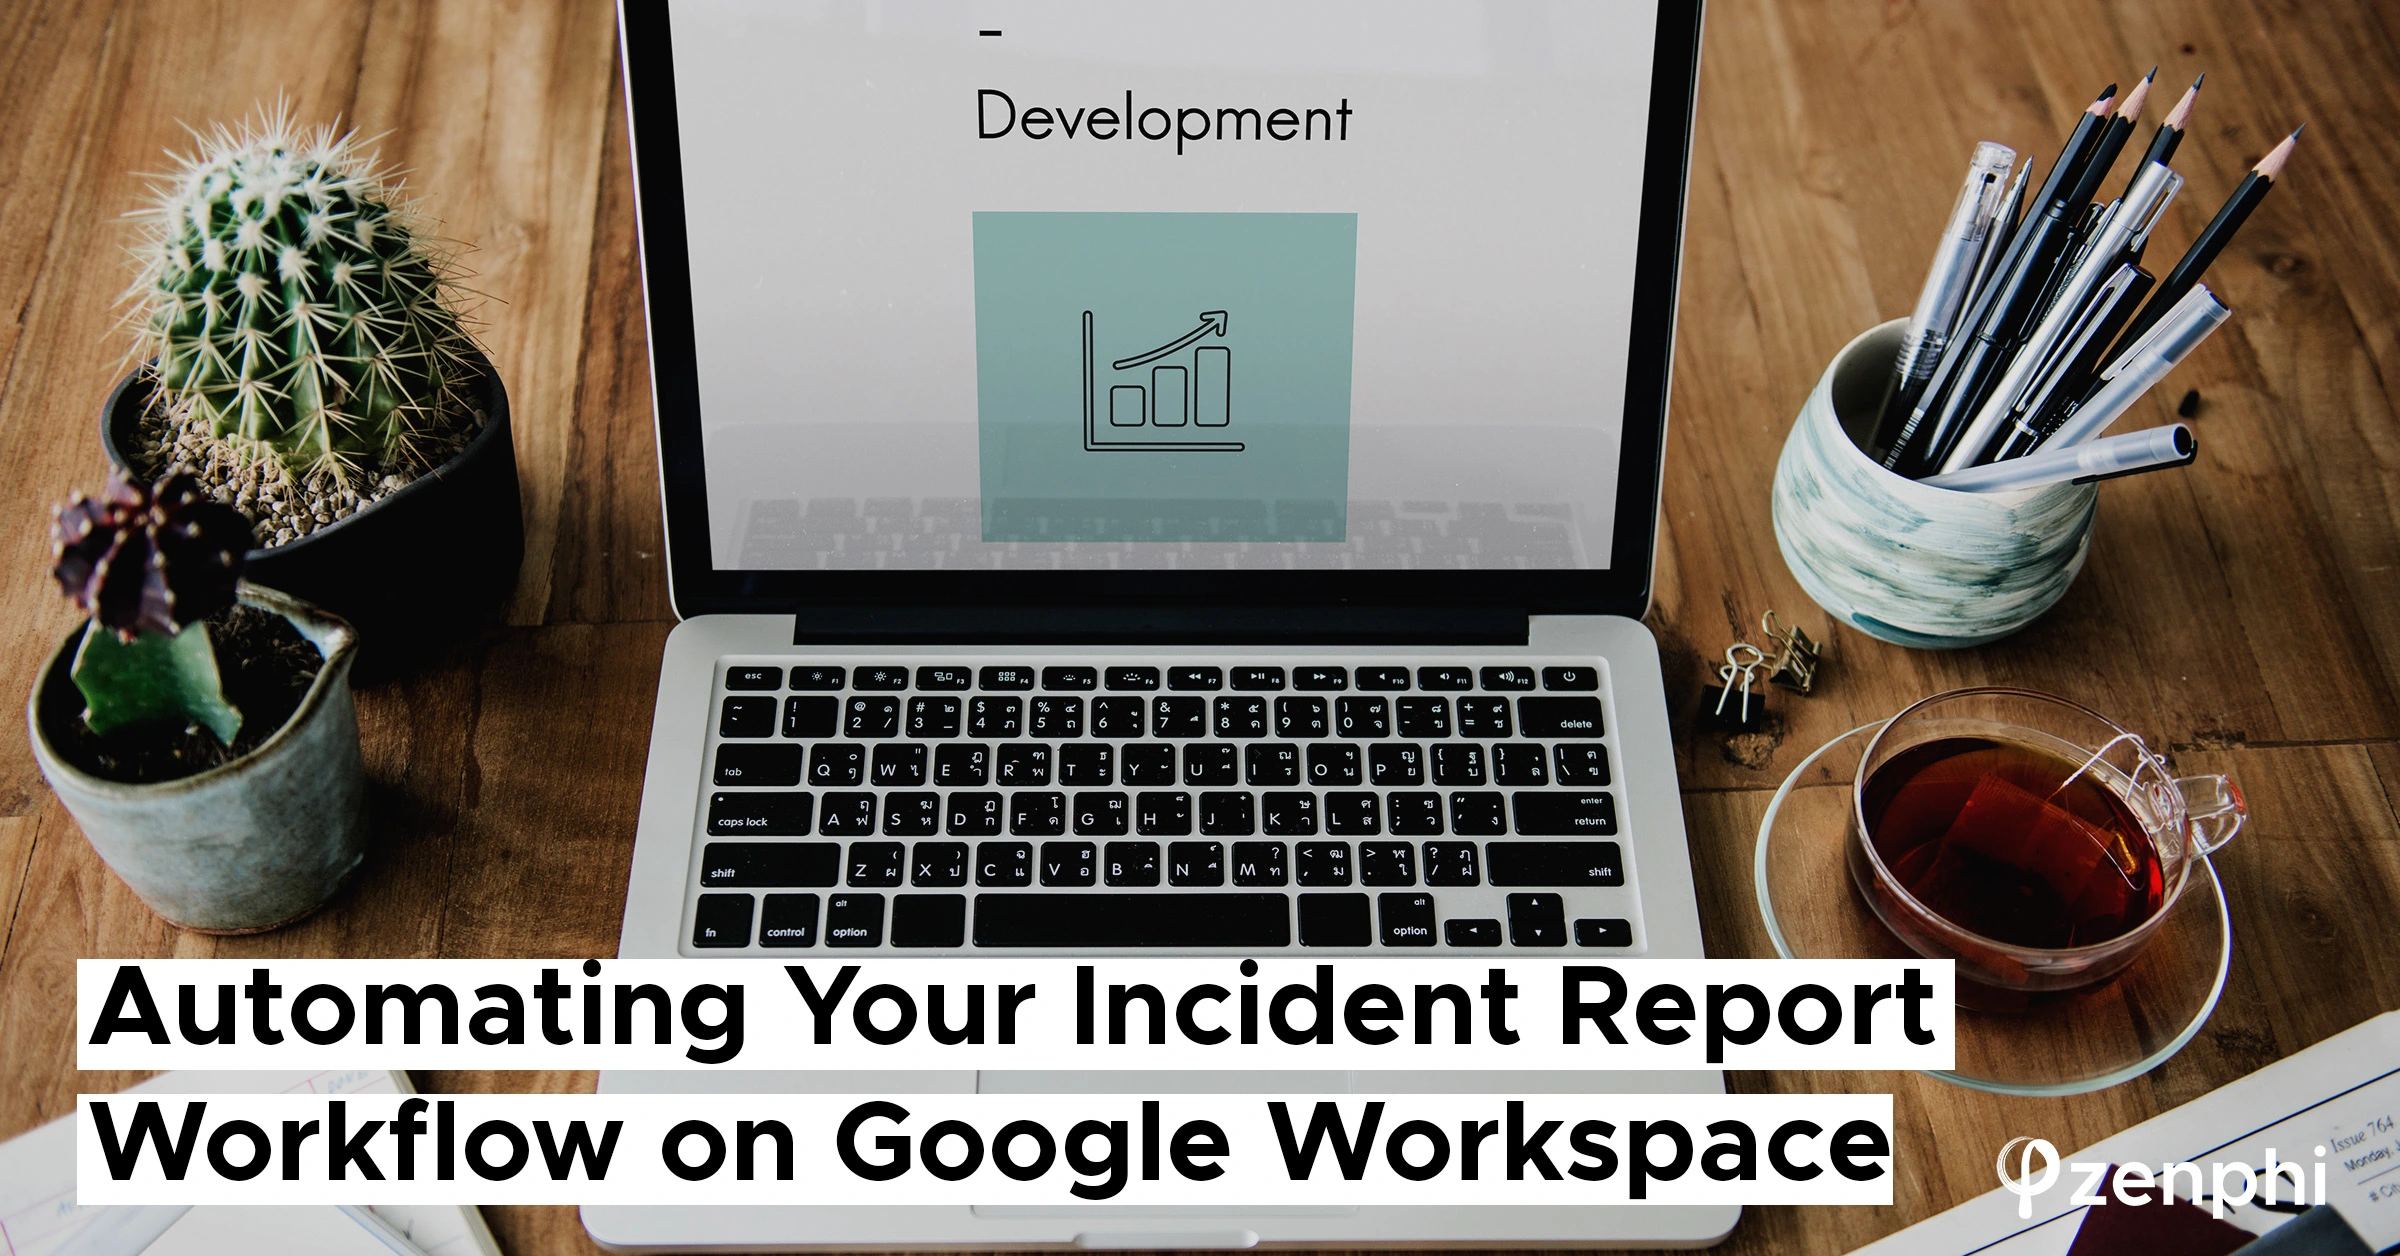 Automating Your Incident Report Workflow on Google Workspace